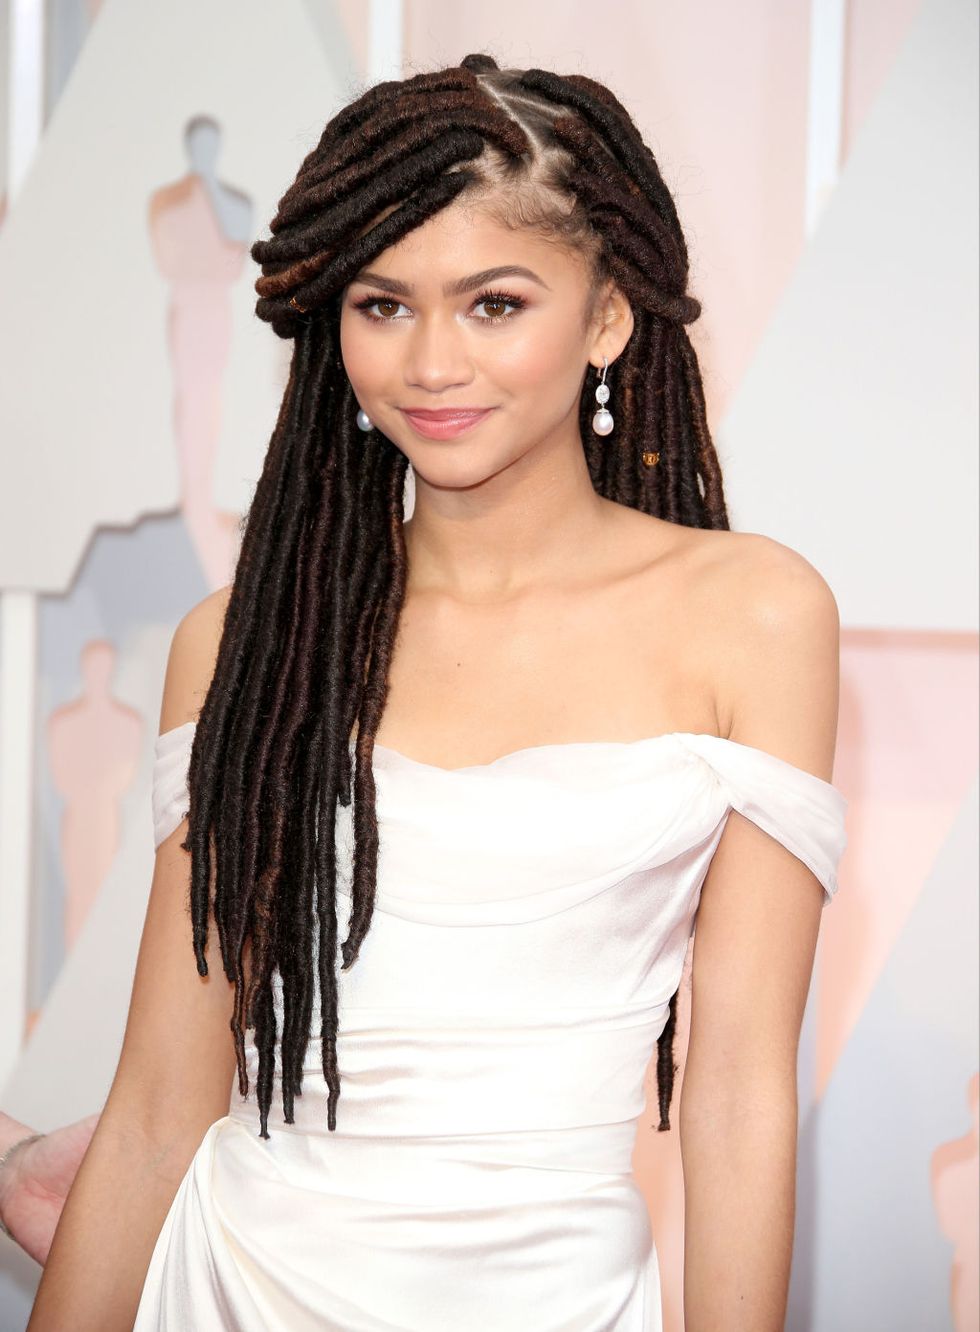 Zendaya is being made into a Barbie Doll